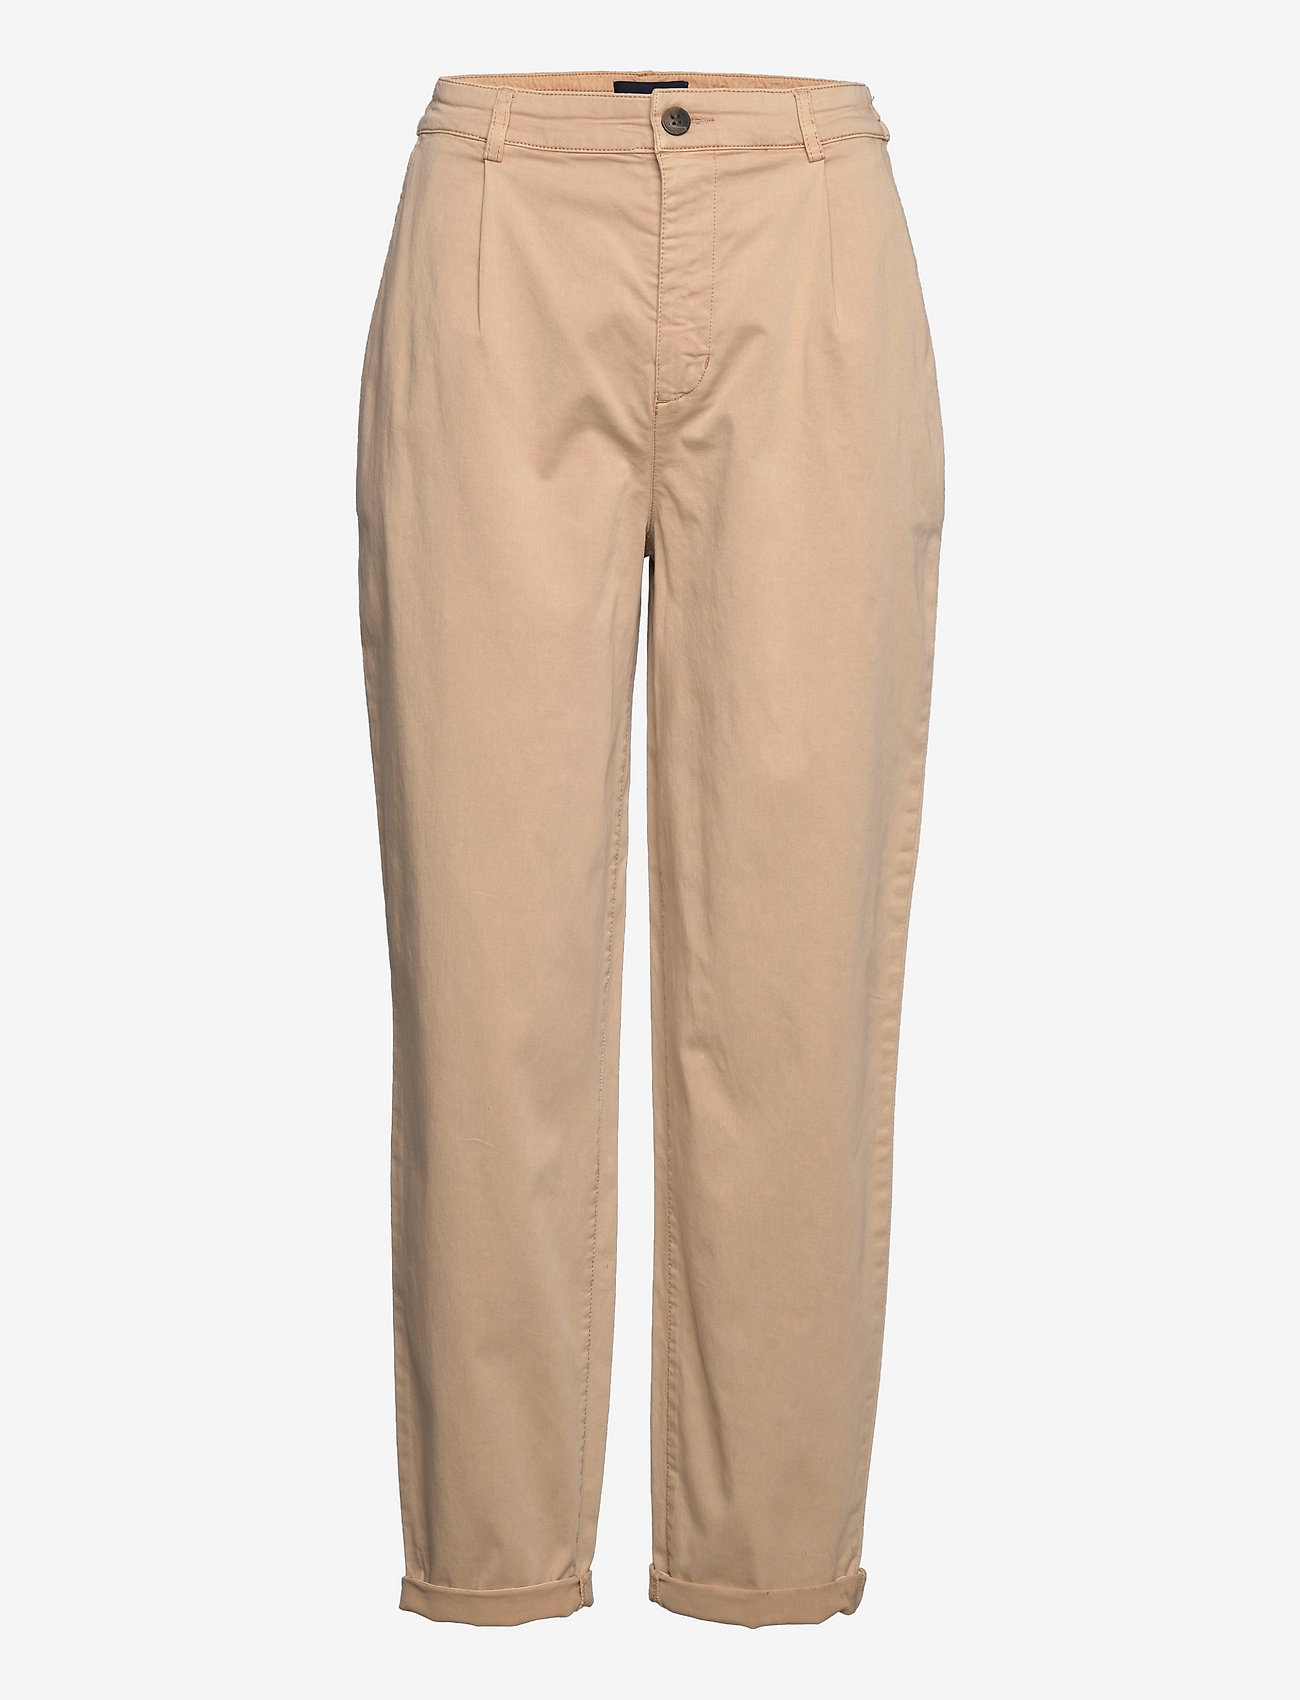 Lexington Clothing - Lilly Cotton/Modal Tapered Pants - chinos - beige - 0